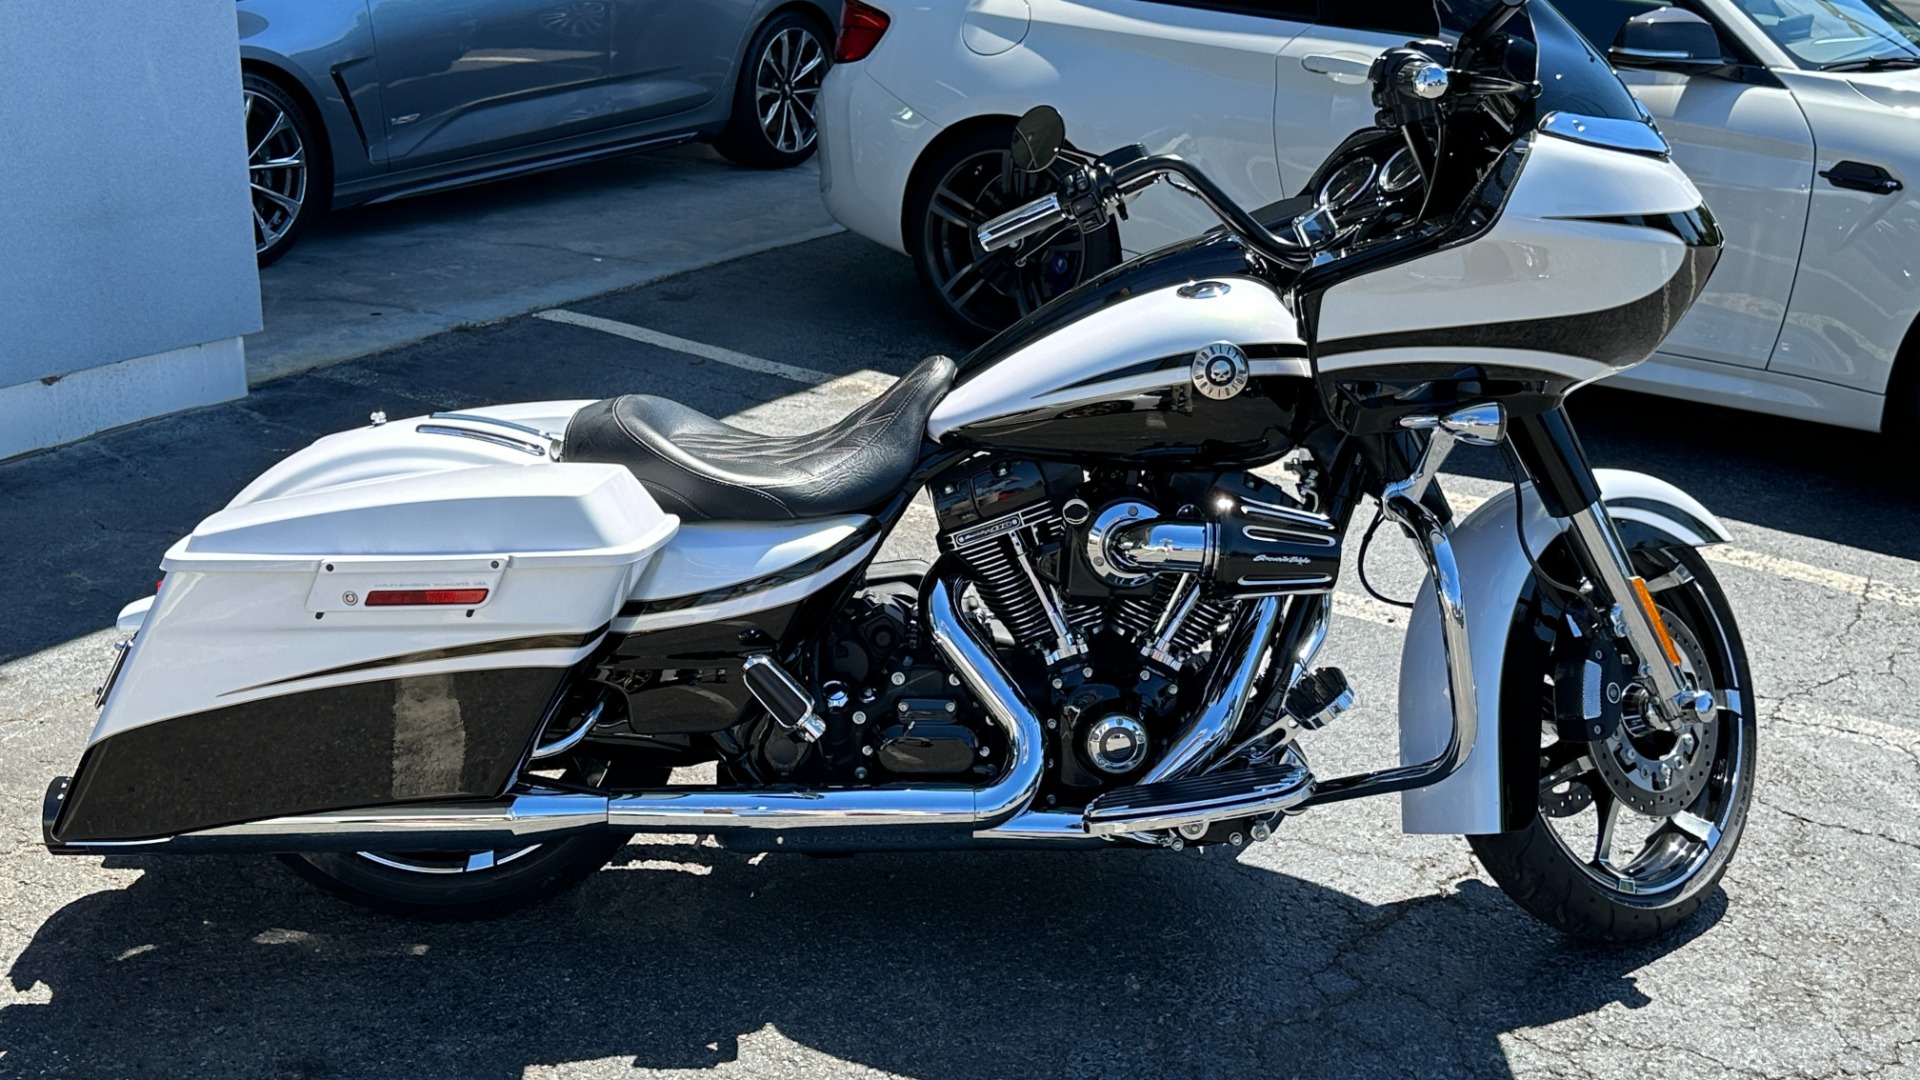 Used 2012 Harley Davidson FLTRXSE CVO Road Glide Custom CVO PAINT / RINEHART EXHAUST / SCREAMING EAGLE 110 ENGINE for sale $32,000 at Formula Imports in Charlotte NC 28227 4